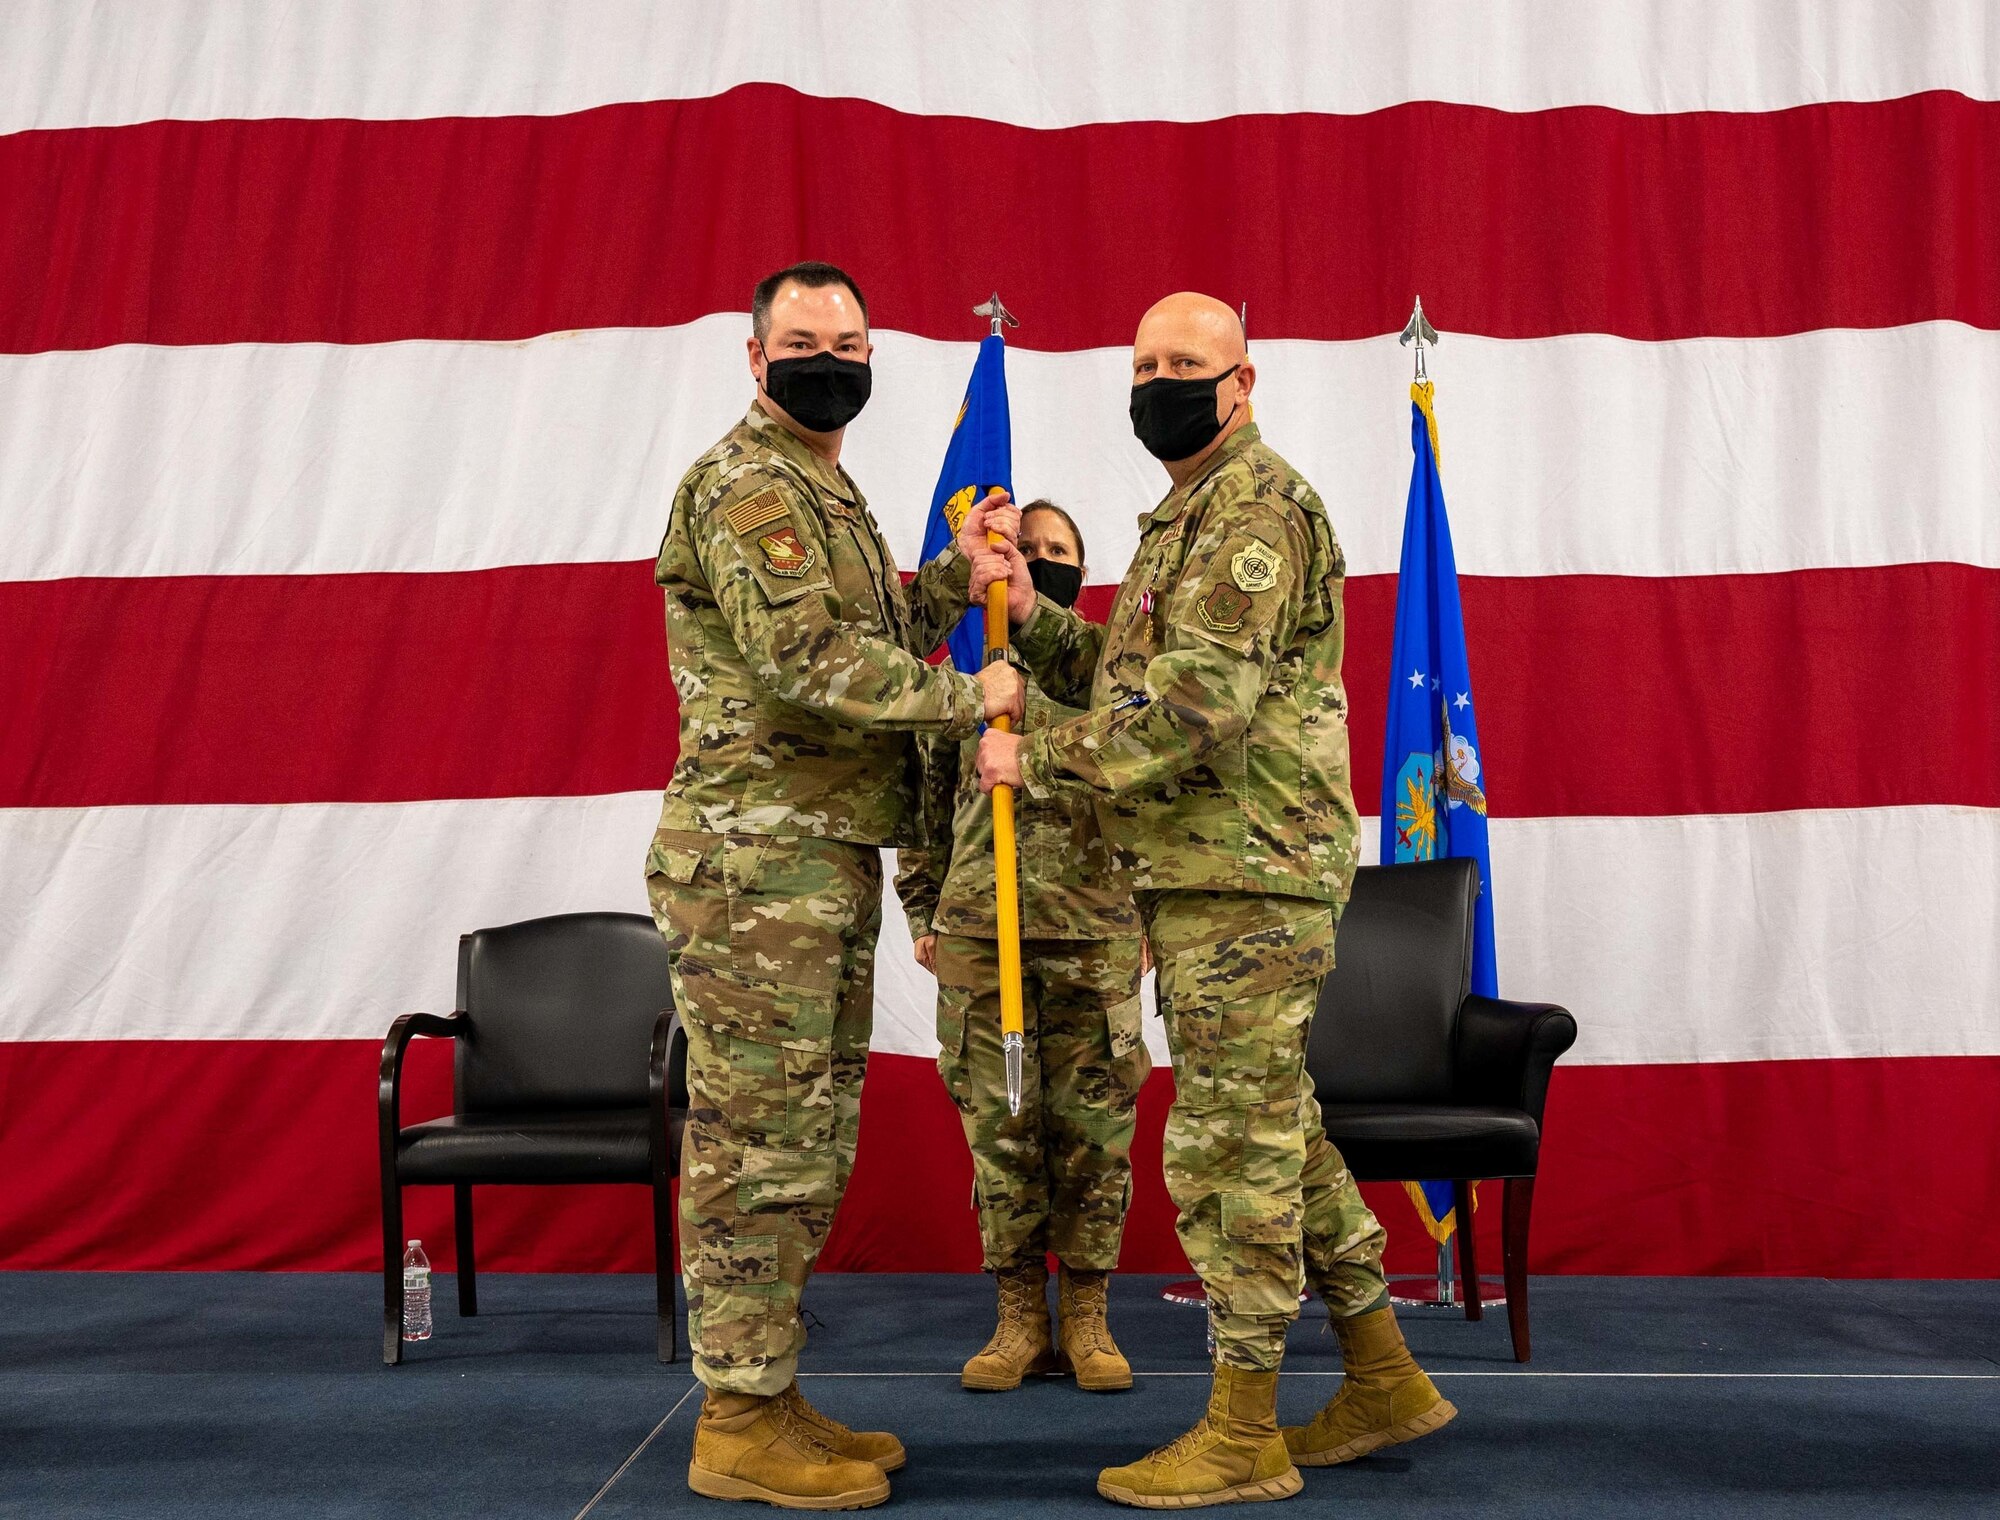 Col. Karwin Weaver, 507th Maintenance Group former commander, relinquishes command of the 507th MXG to Col. Michael Parks, 507th Air Refueling Wing commander, during a ceremony Jan. 8, 2022, at Tinker Air Force Base, Oklahoma. (U.S. Air Force photo by Master Sgt. Grady Epperly)